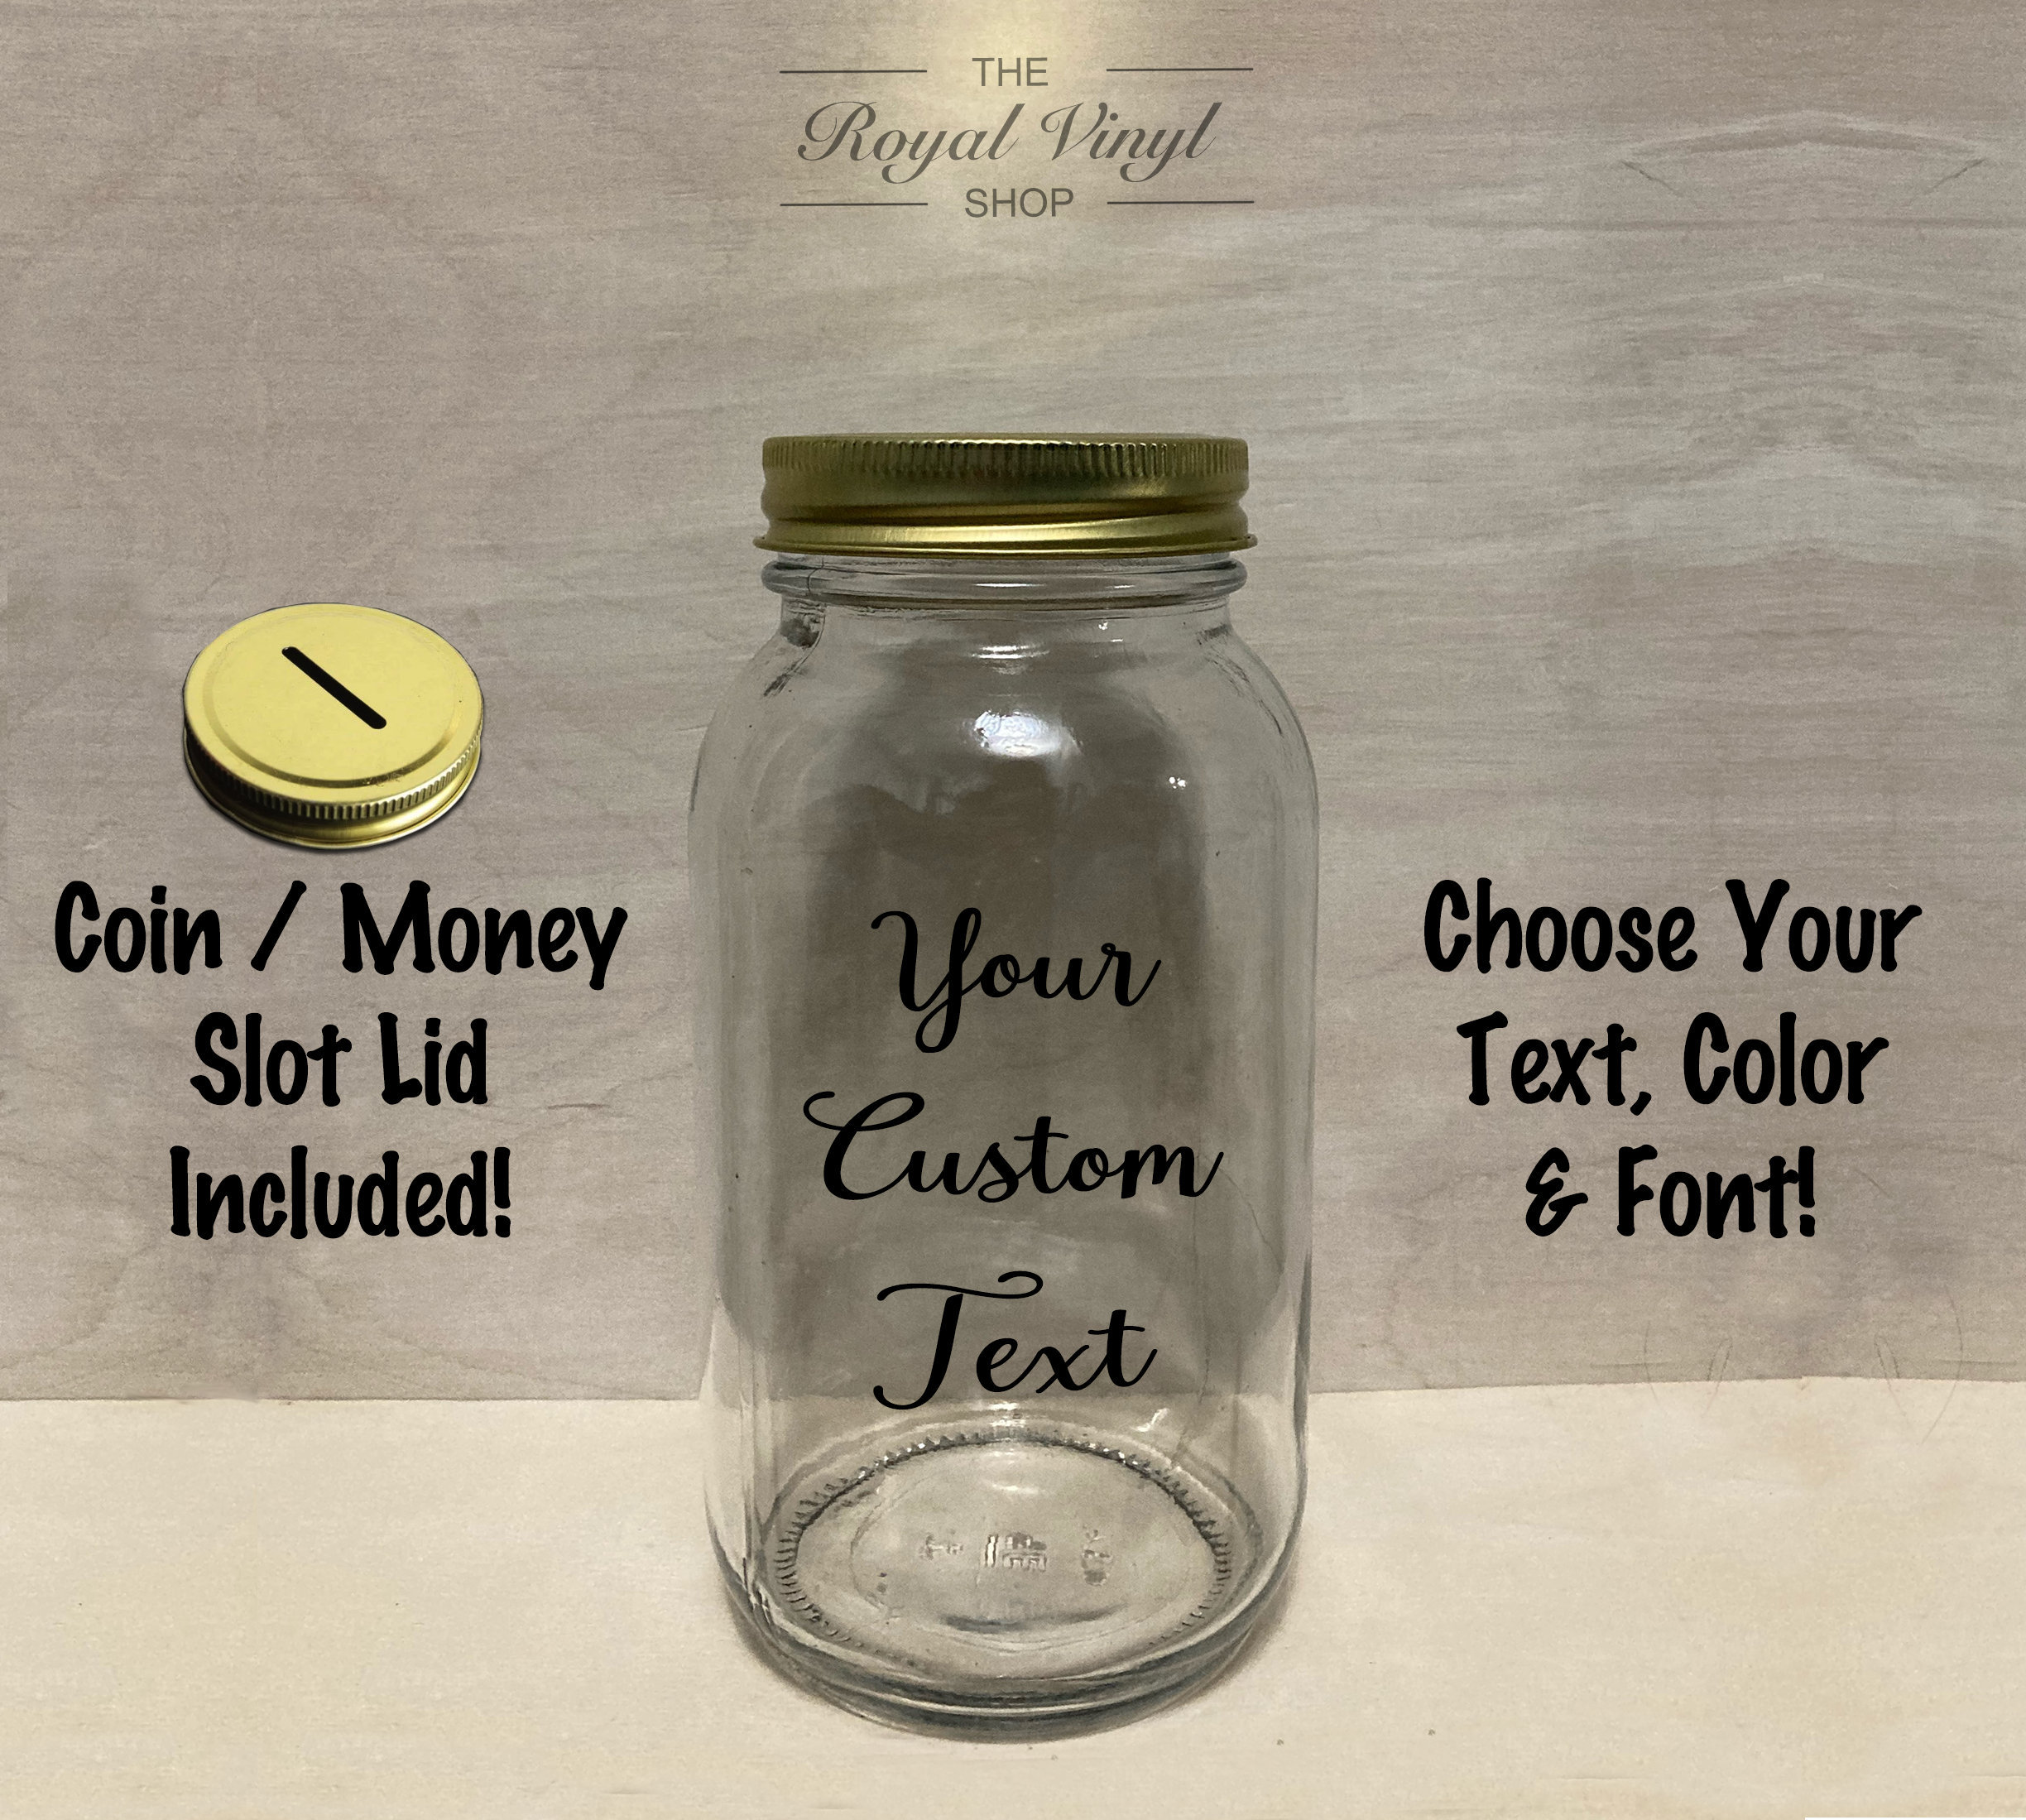 Available in 3 Sizes Coin Slot Lid Date Night Fund Mason Jar Bank 